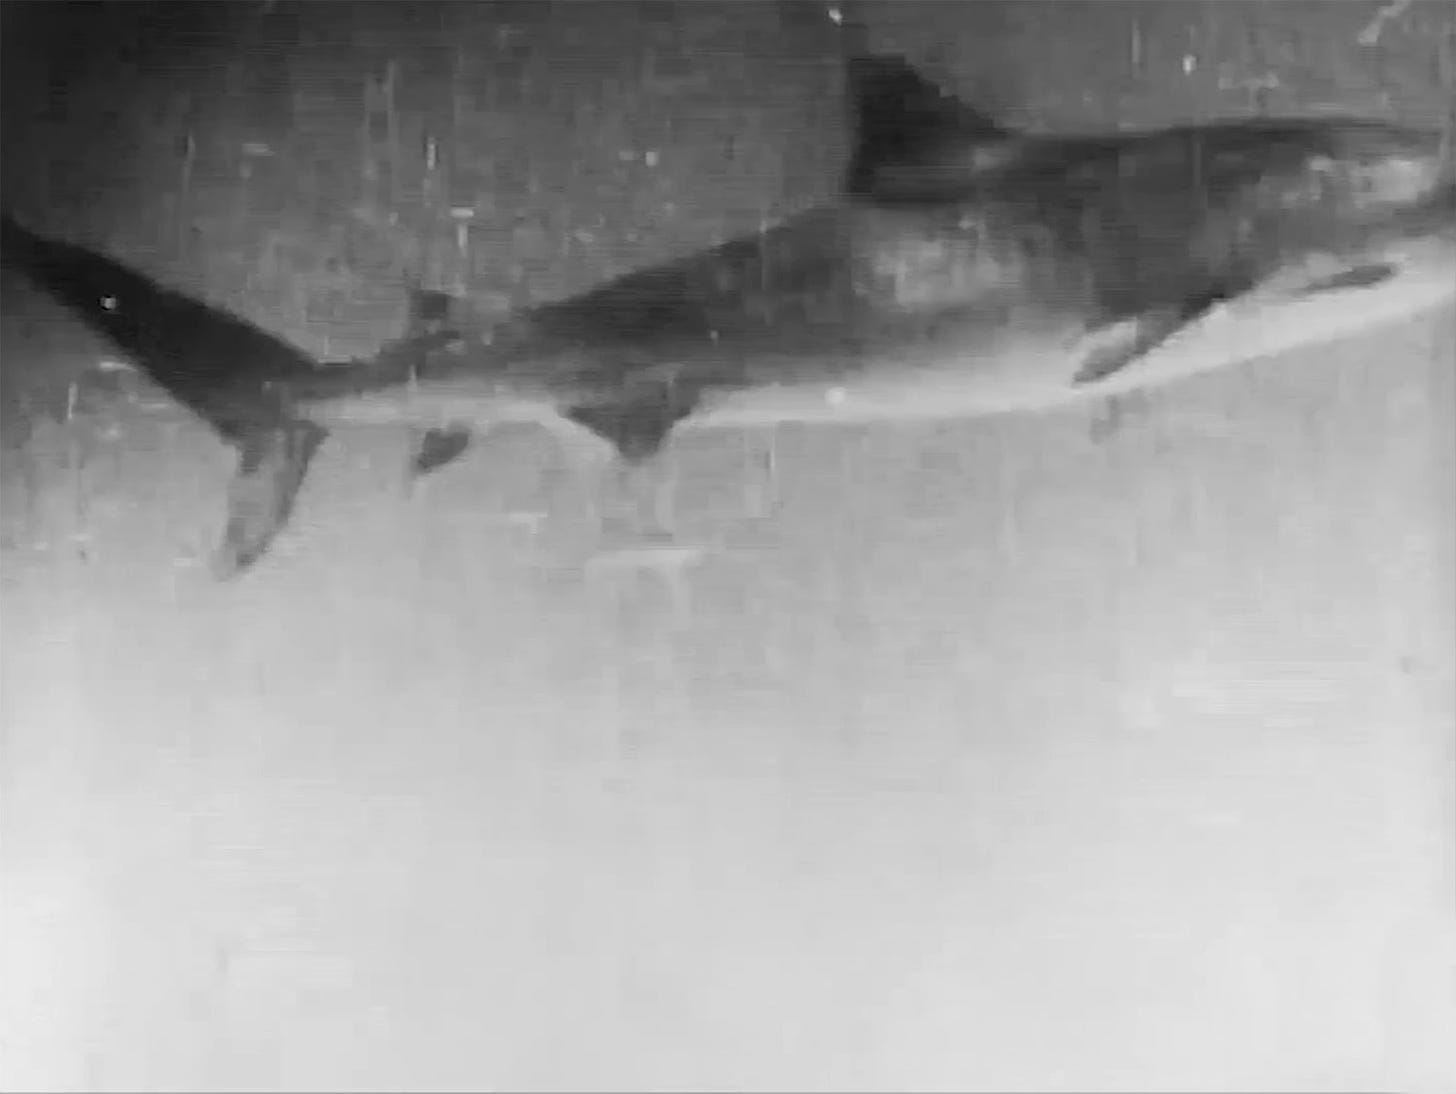 Black and white film still showing a shark swimming left to right - from the 1916 film 20,000 Leagues Under the Sea